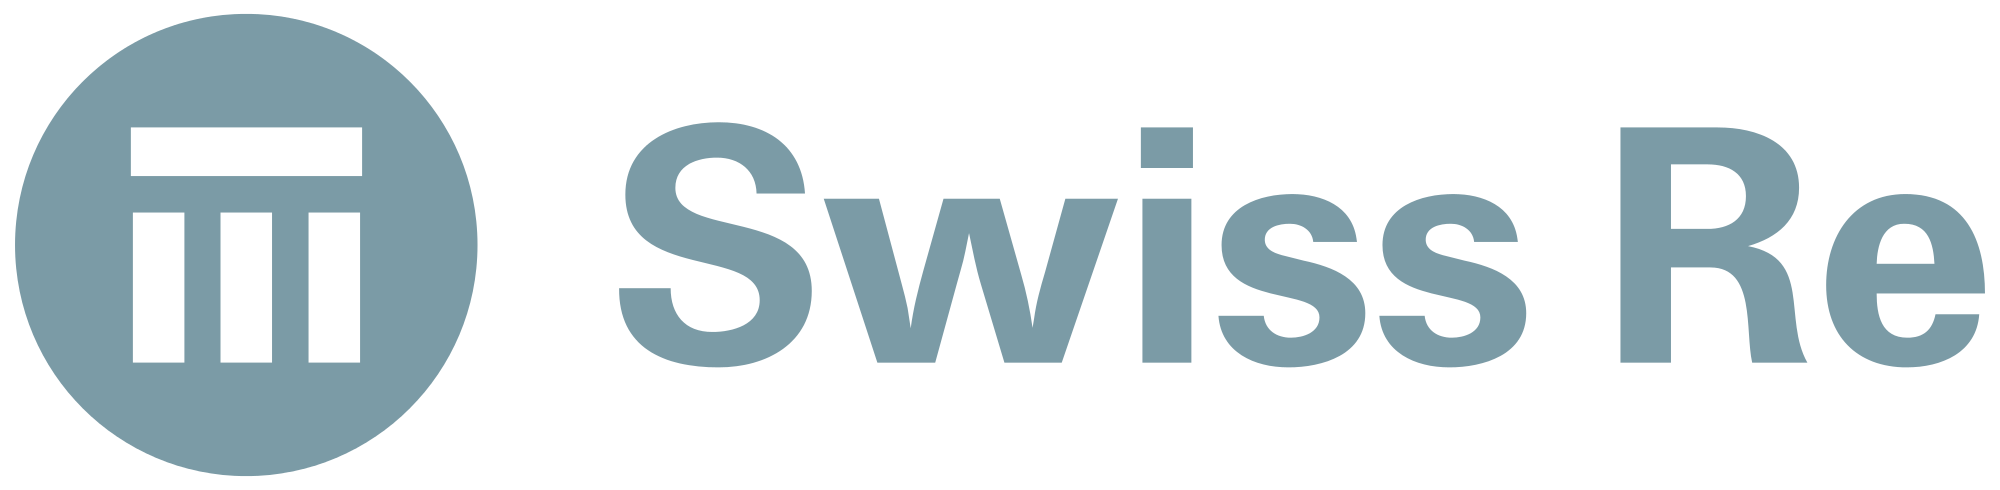 Swiss re logo color.png